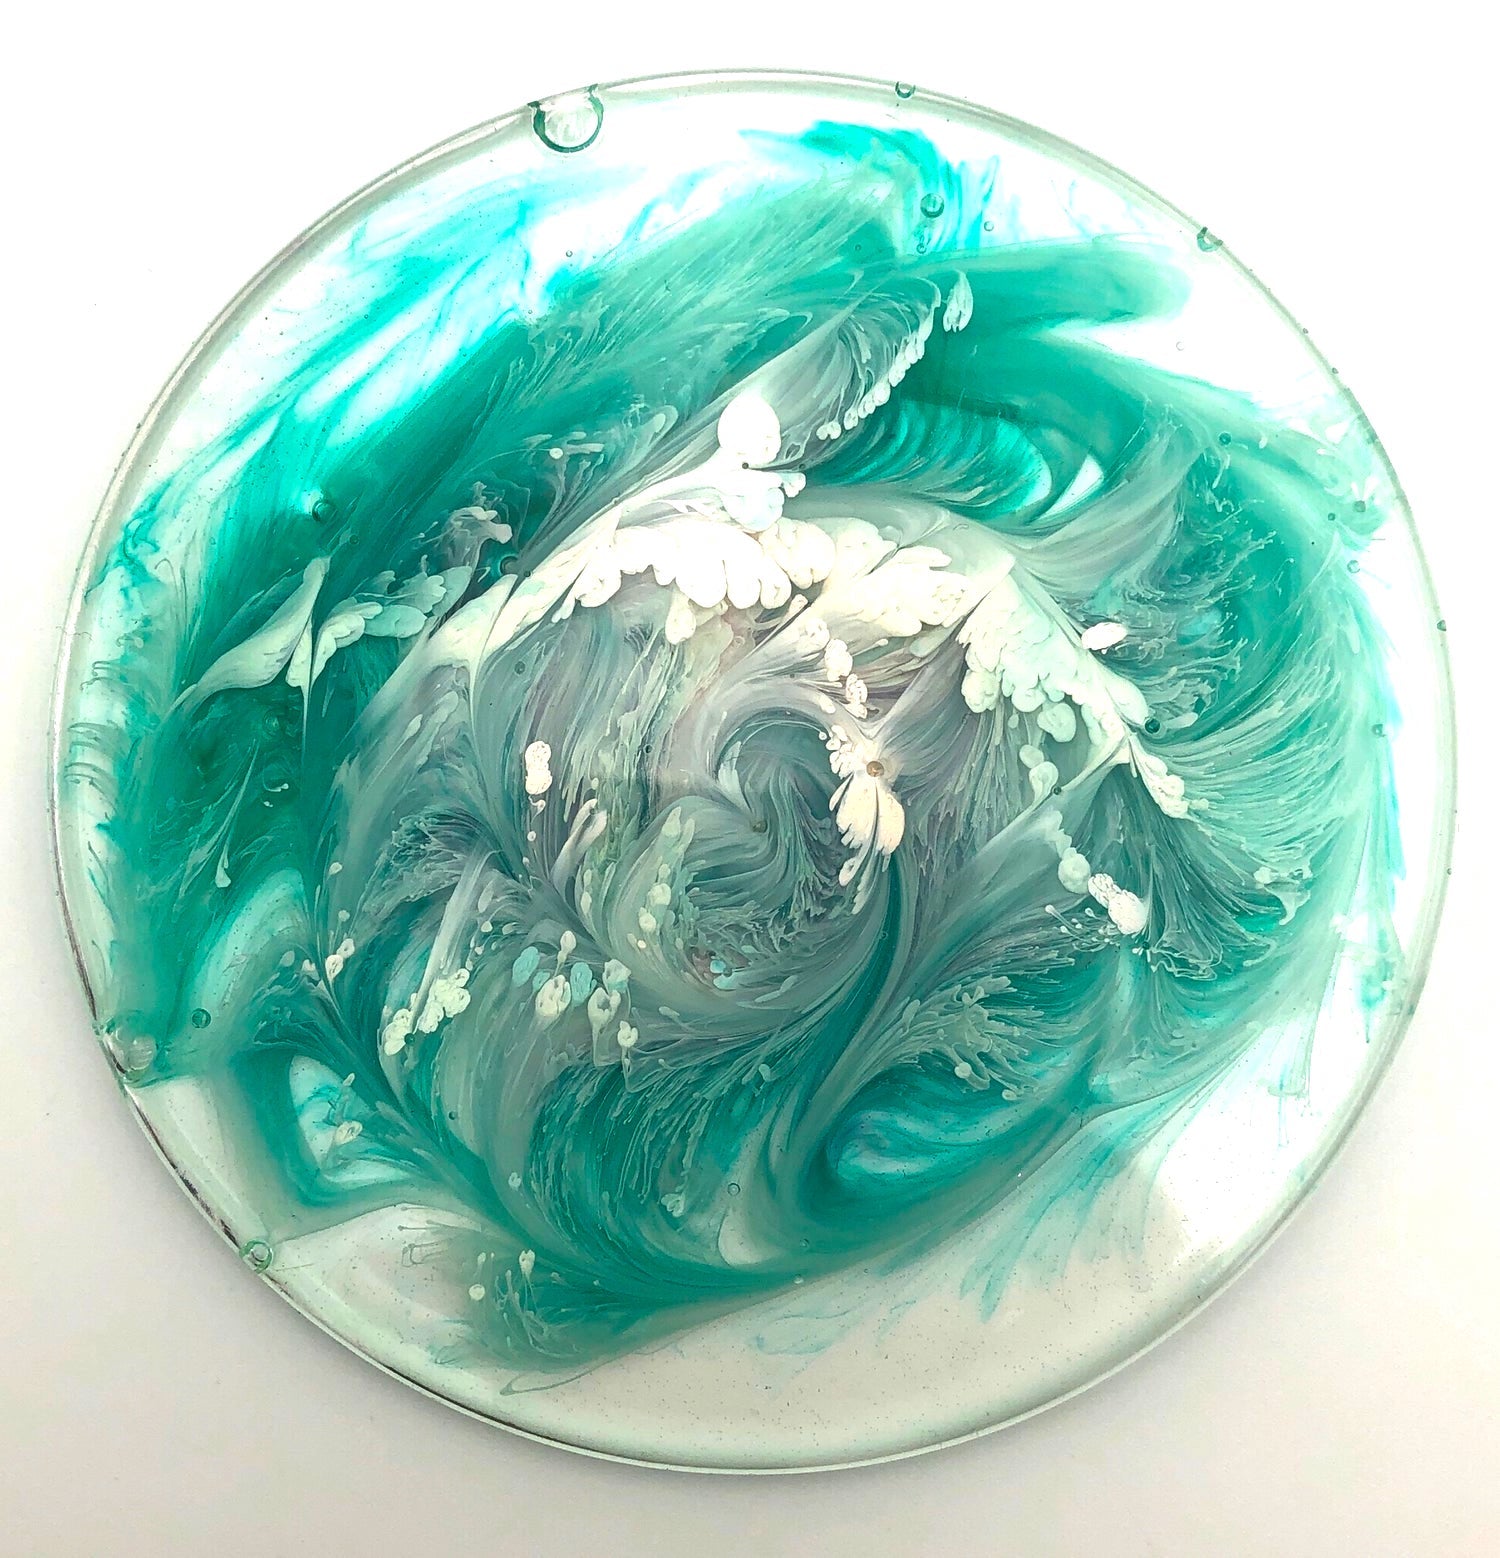 "Dolphins" Resin Coasters